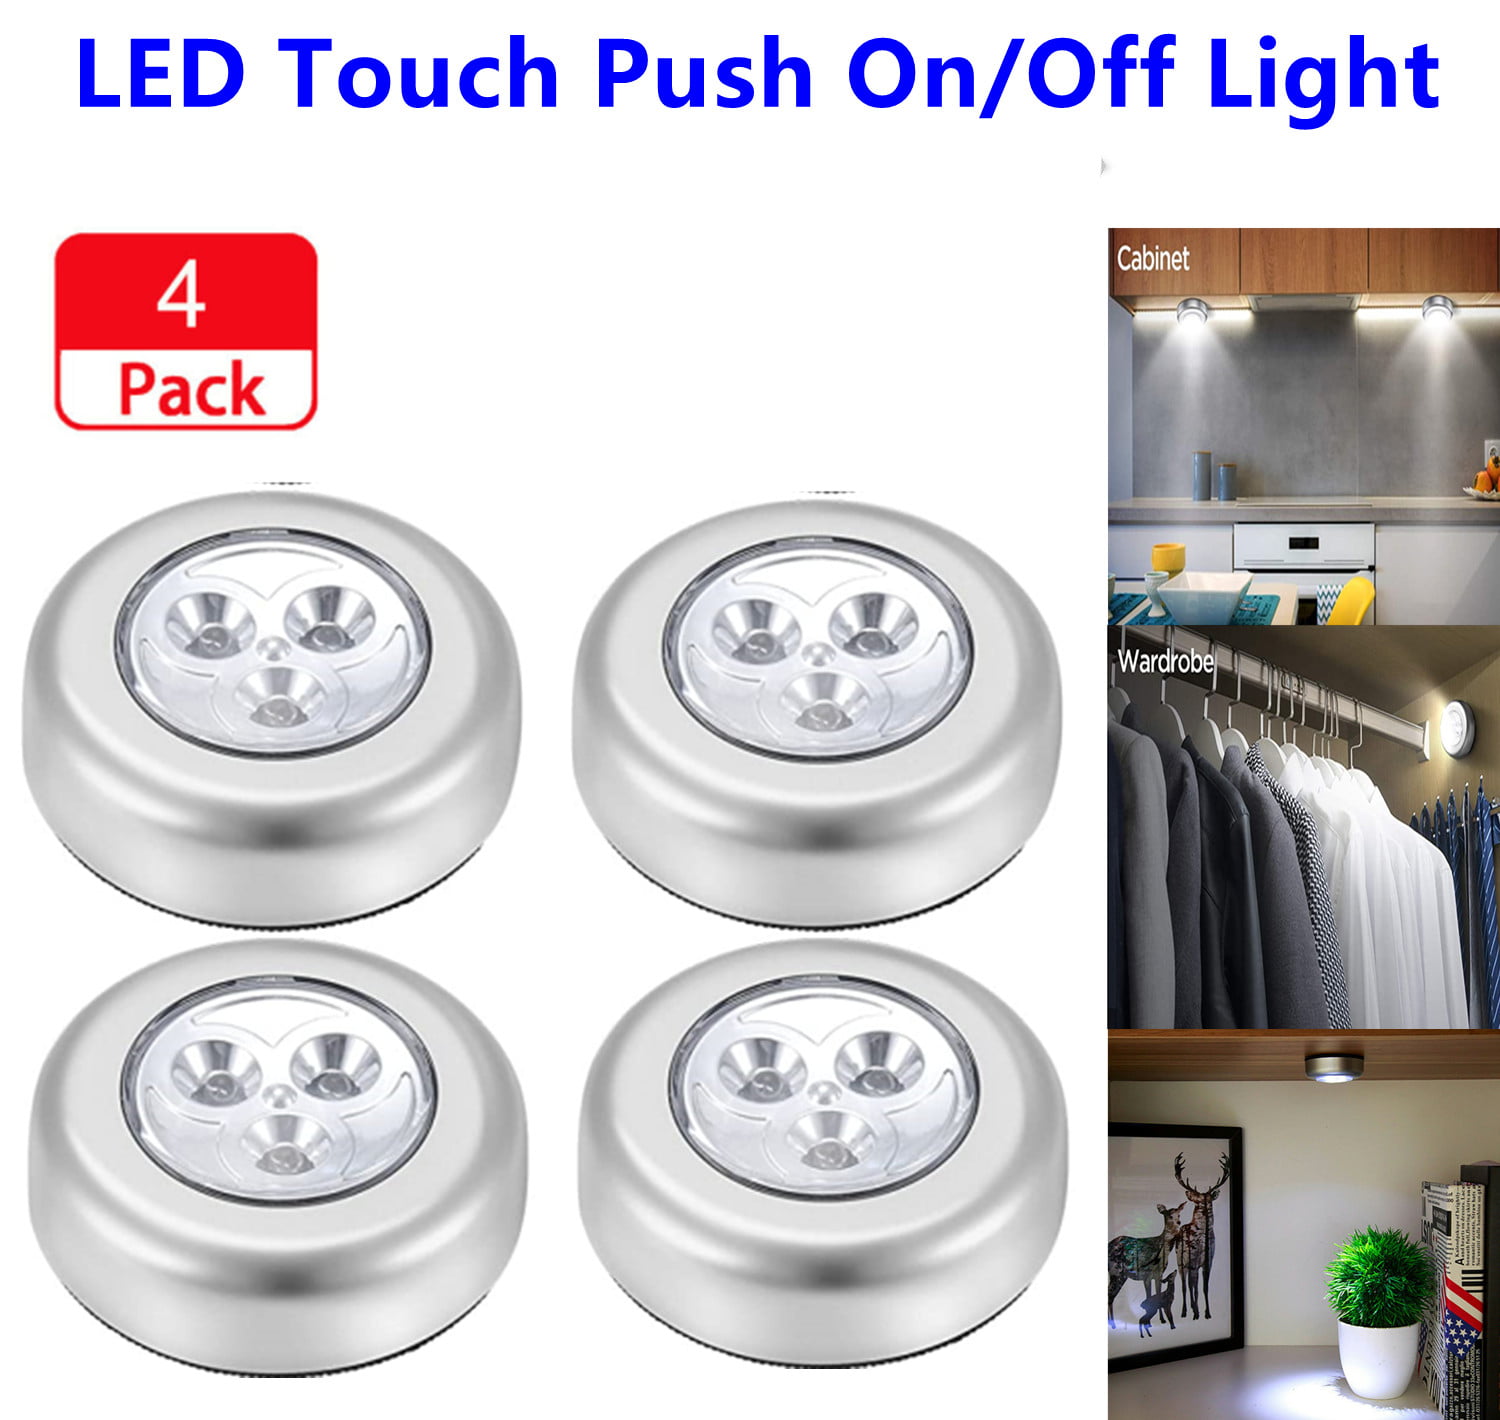 10PCS 3 LED Touch Push On/Off Light Self-Stick On Click Battery Operated Lights 